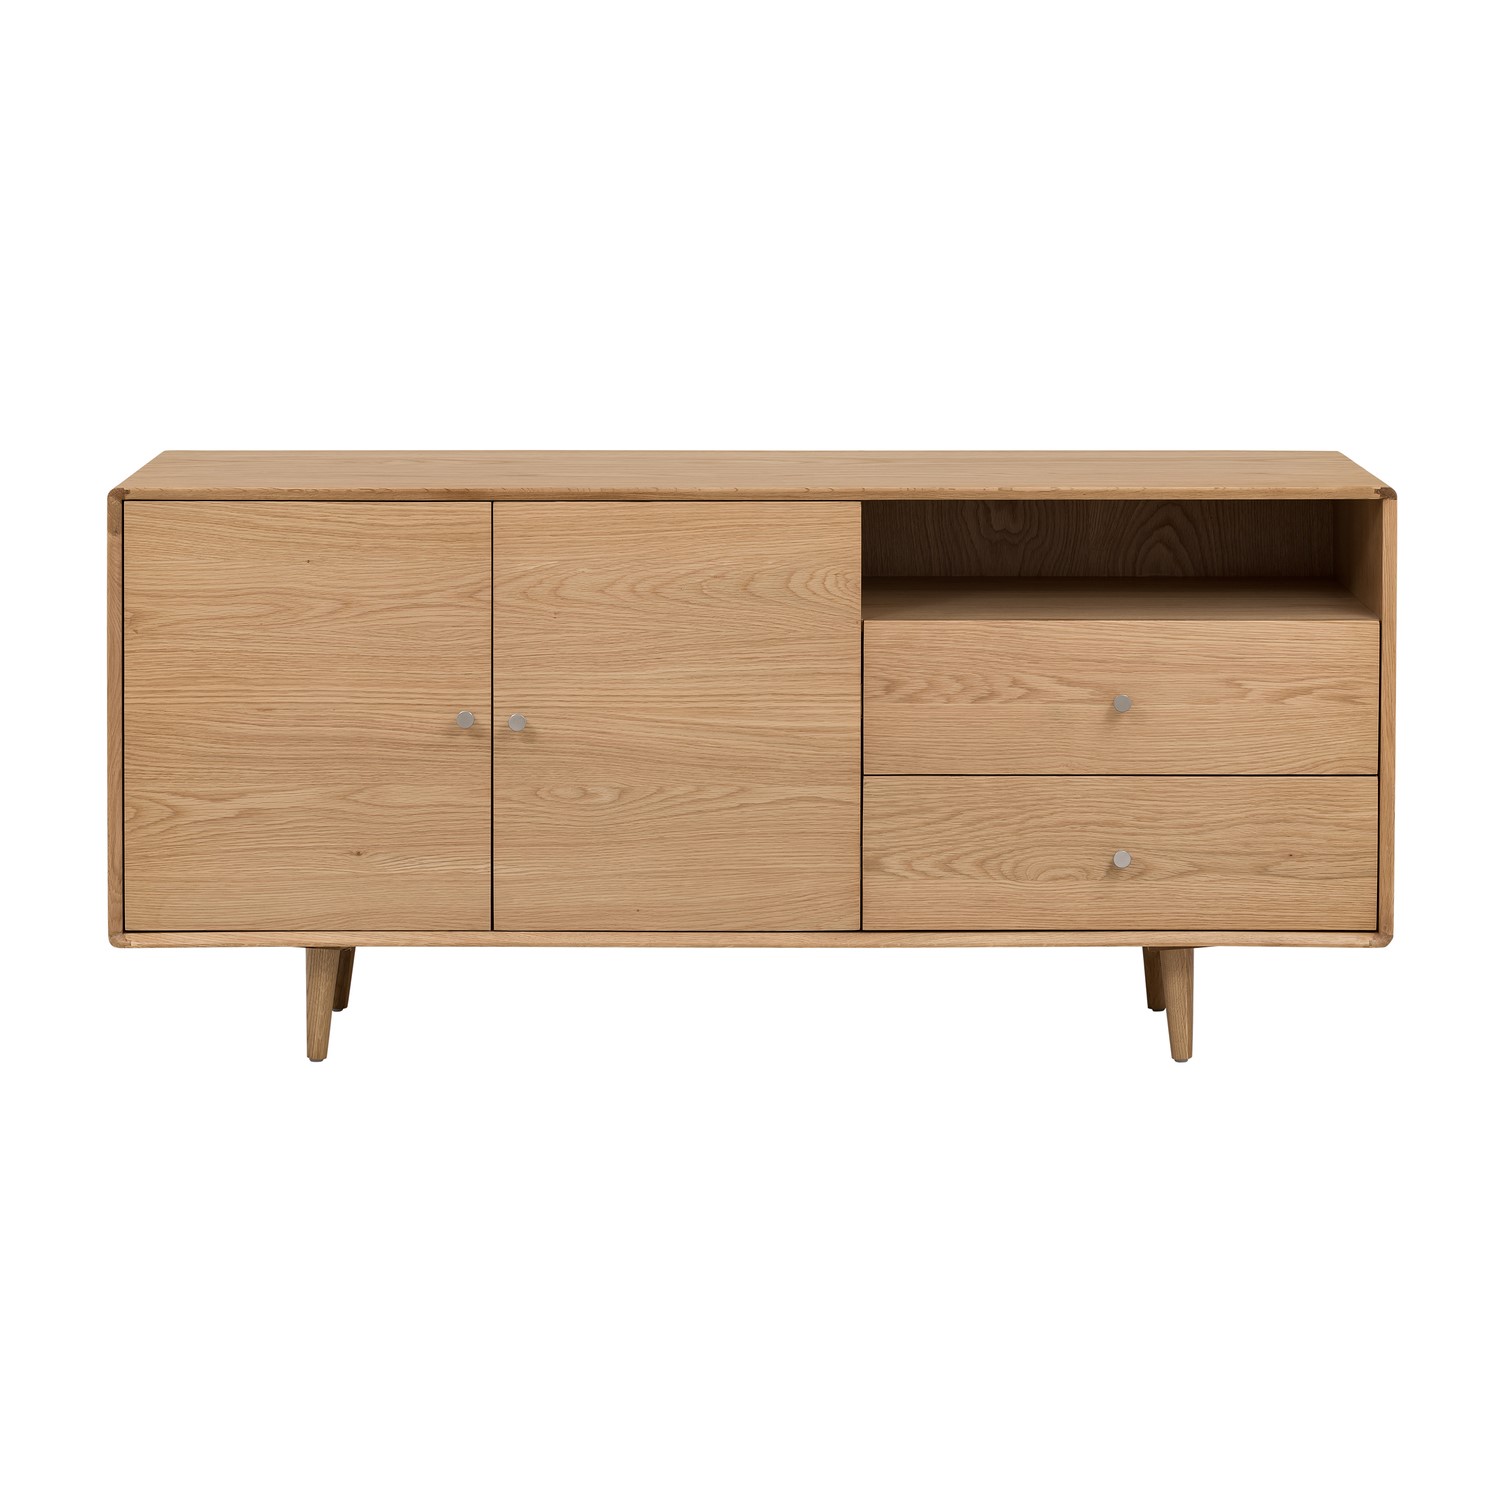 Photo of Large solid oak sideboard - marny